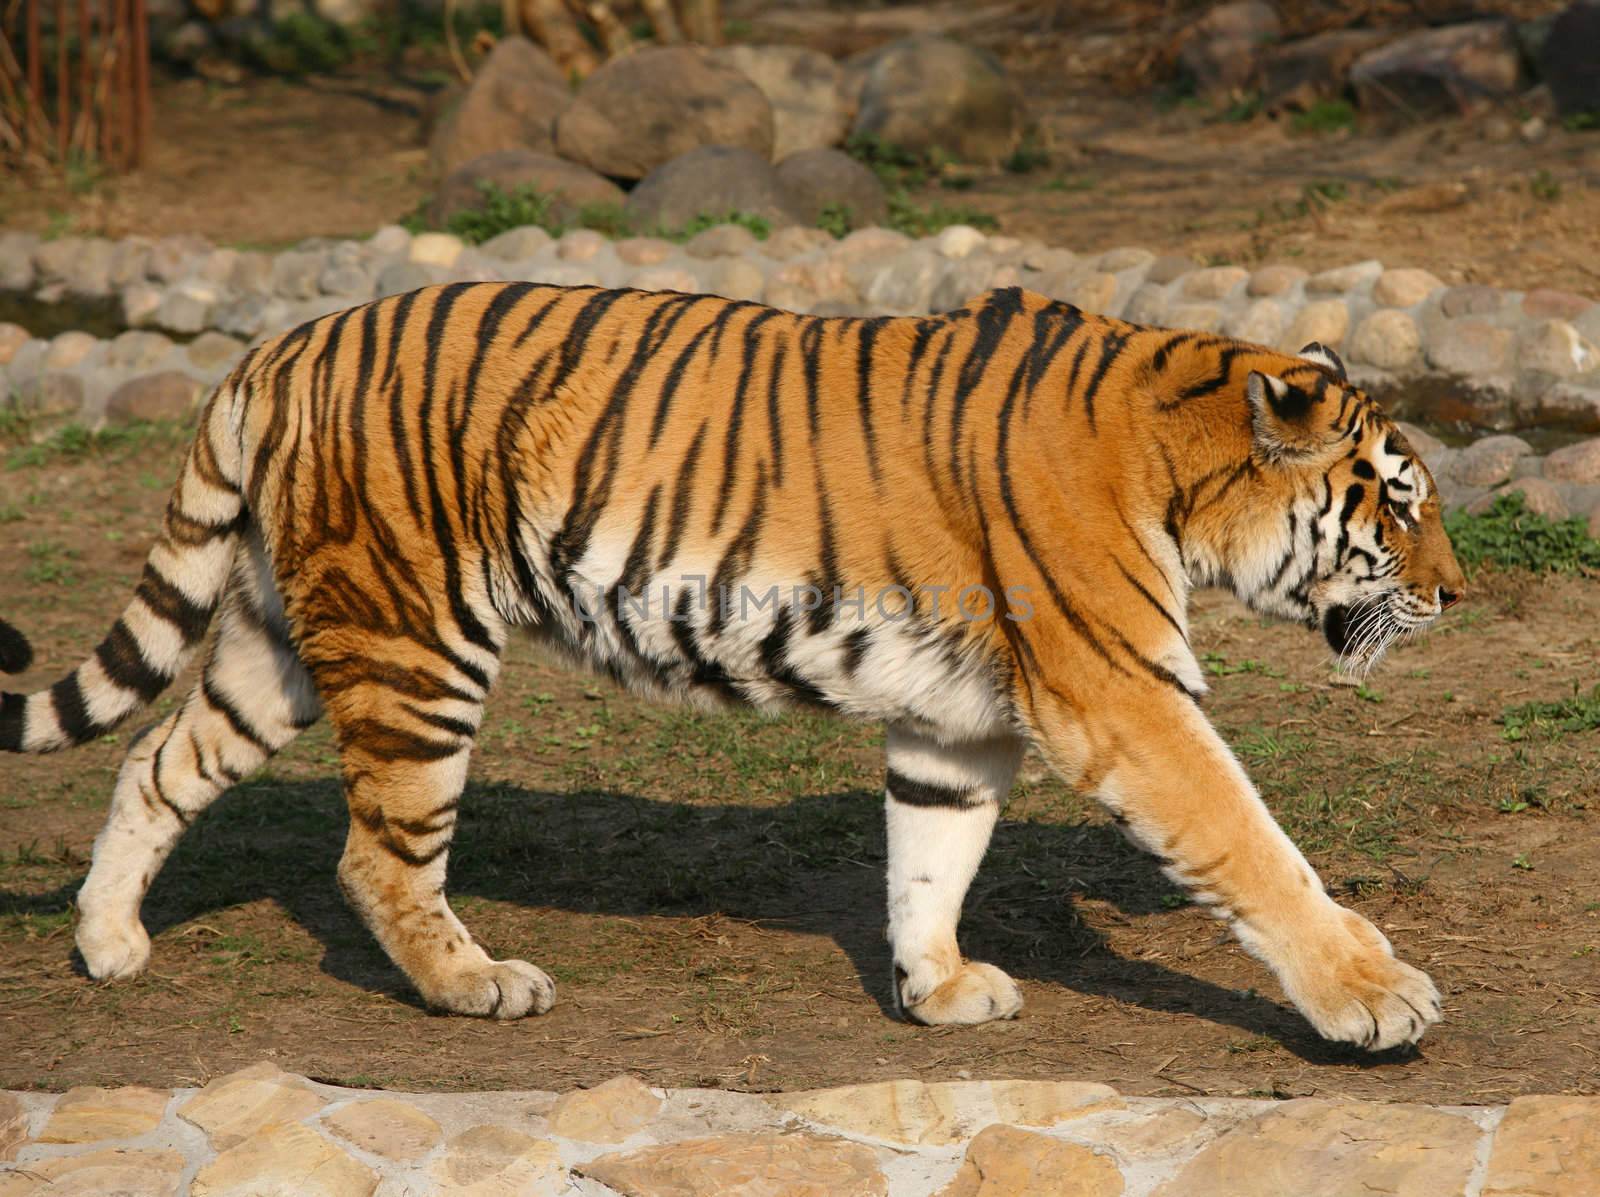 Tiger with mouth open, showing teeth. Moscow zoo